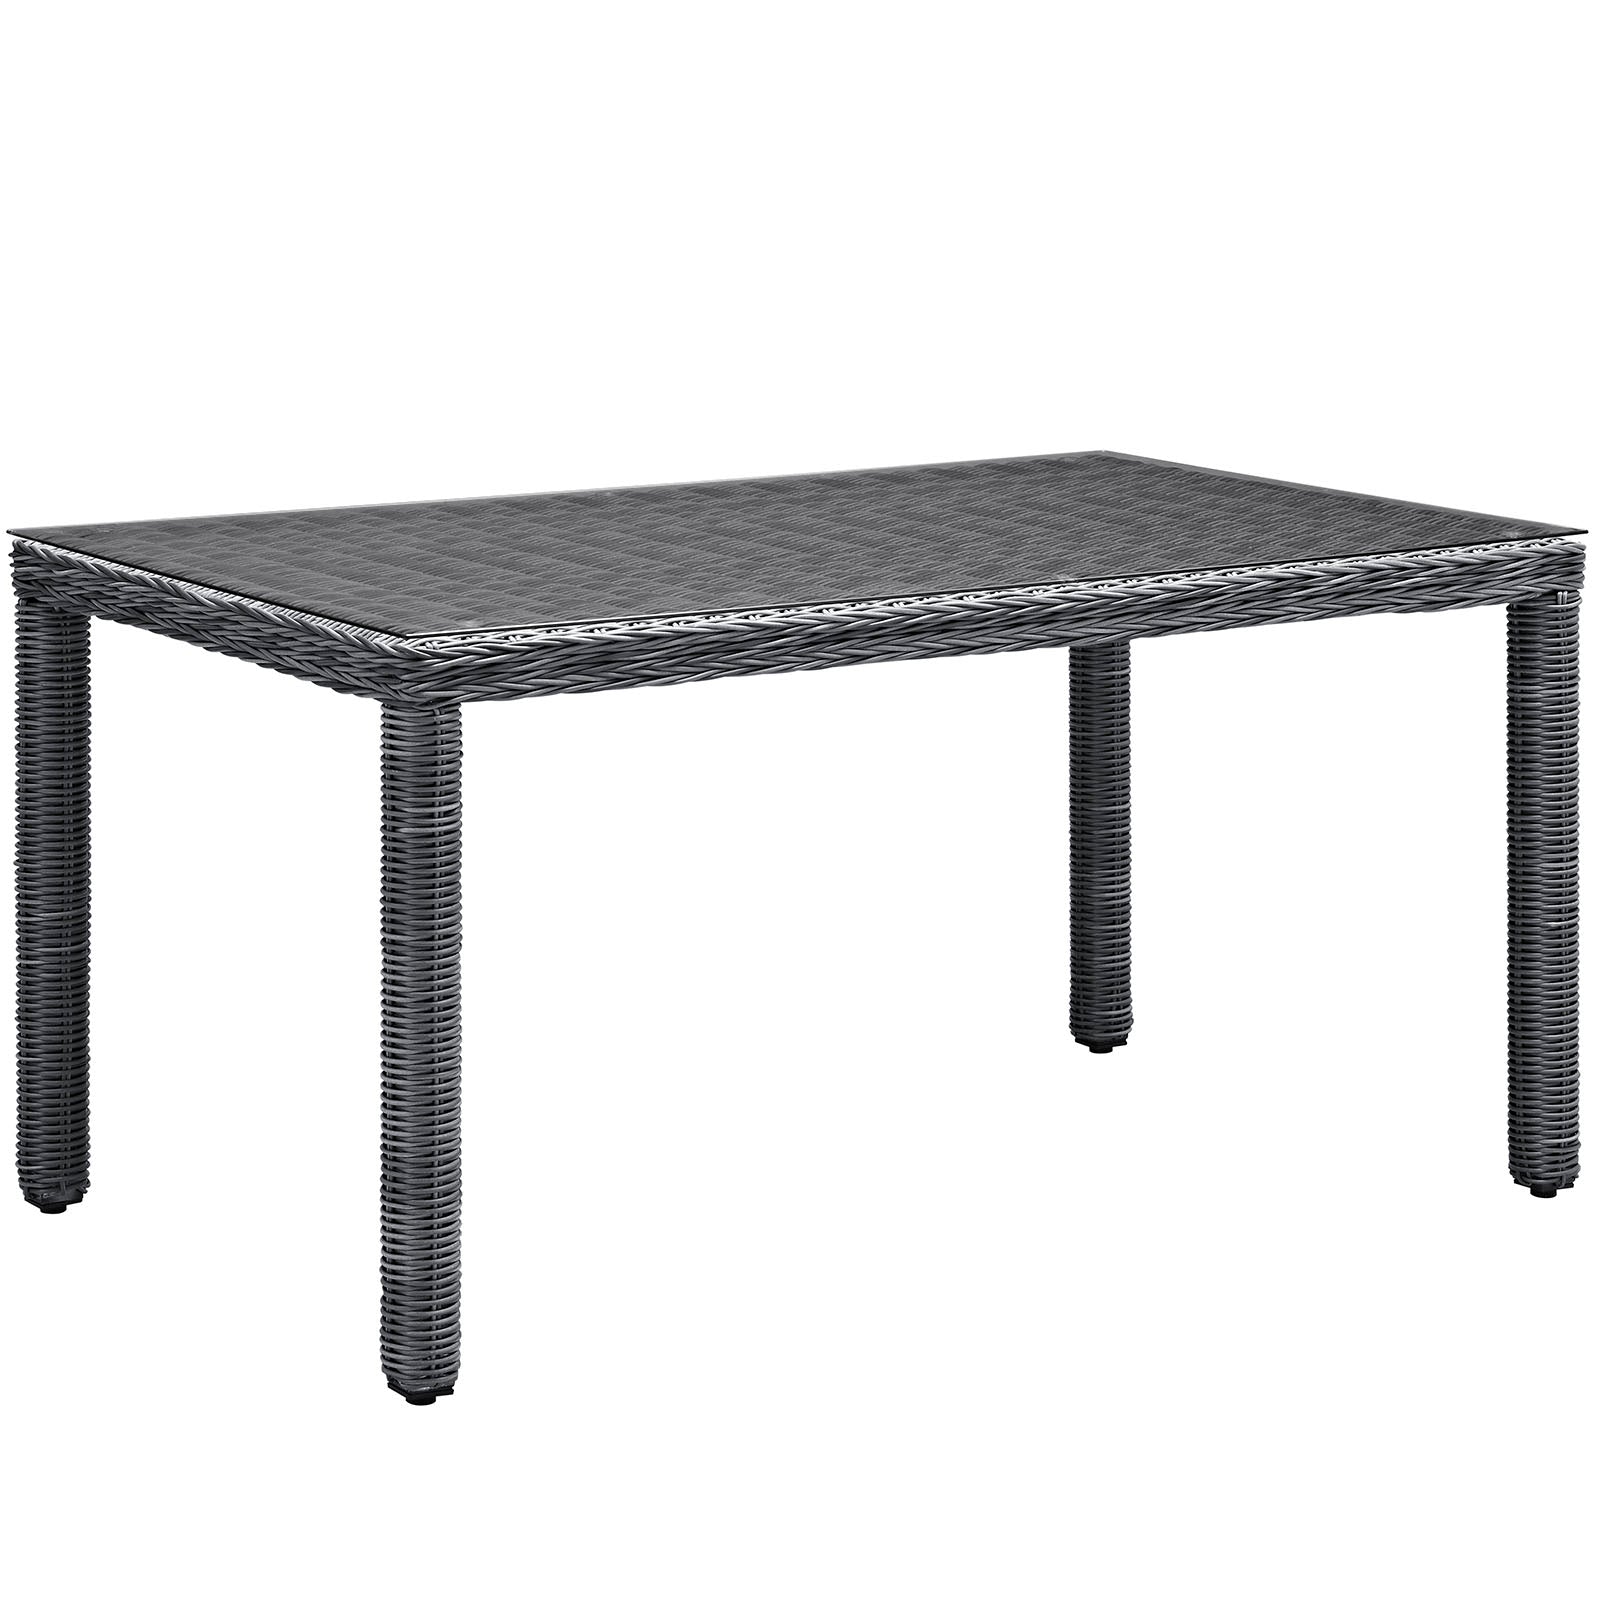 Summon 59" Outdoor Patio Dining Table - East Shore Modern Home Furnishings